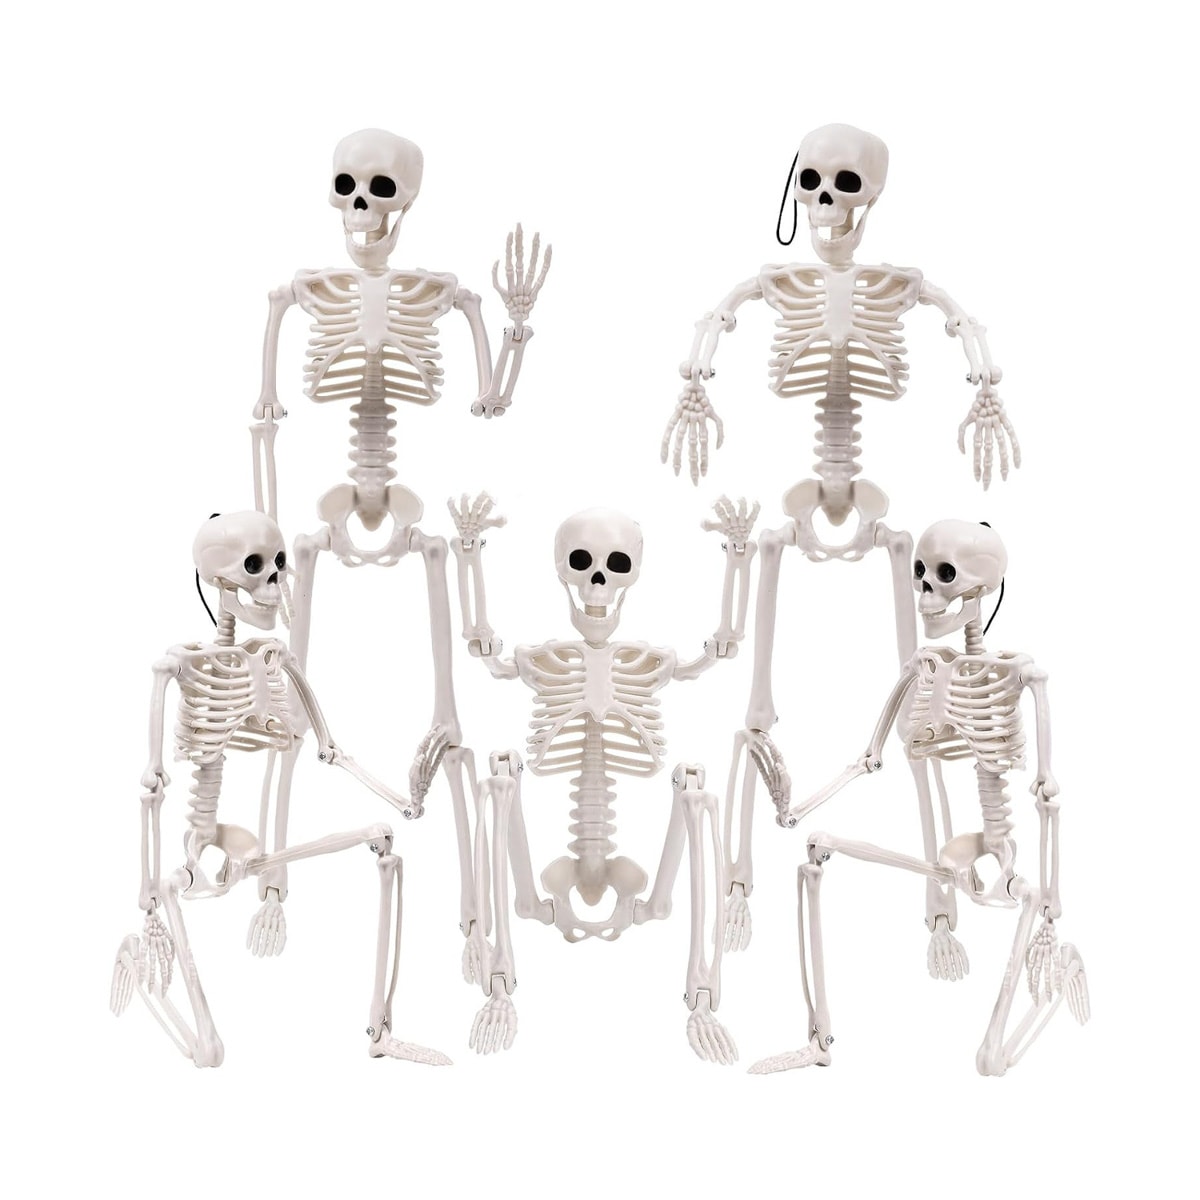 5 posable skeletons.